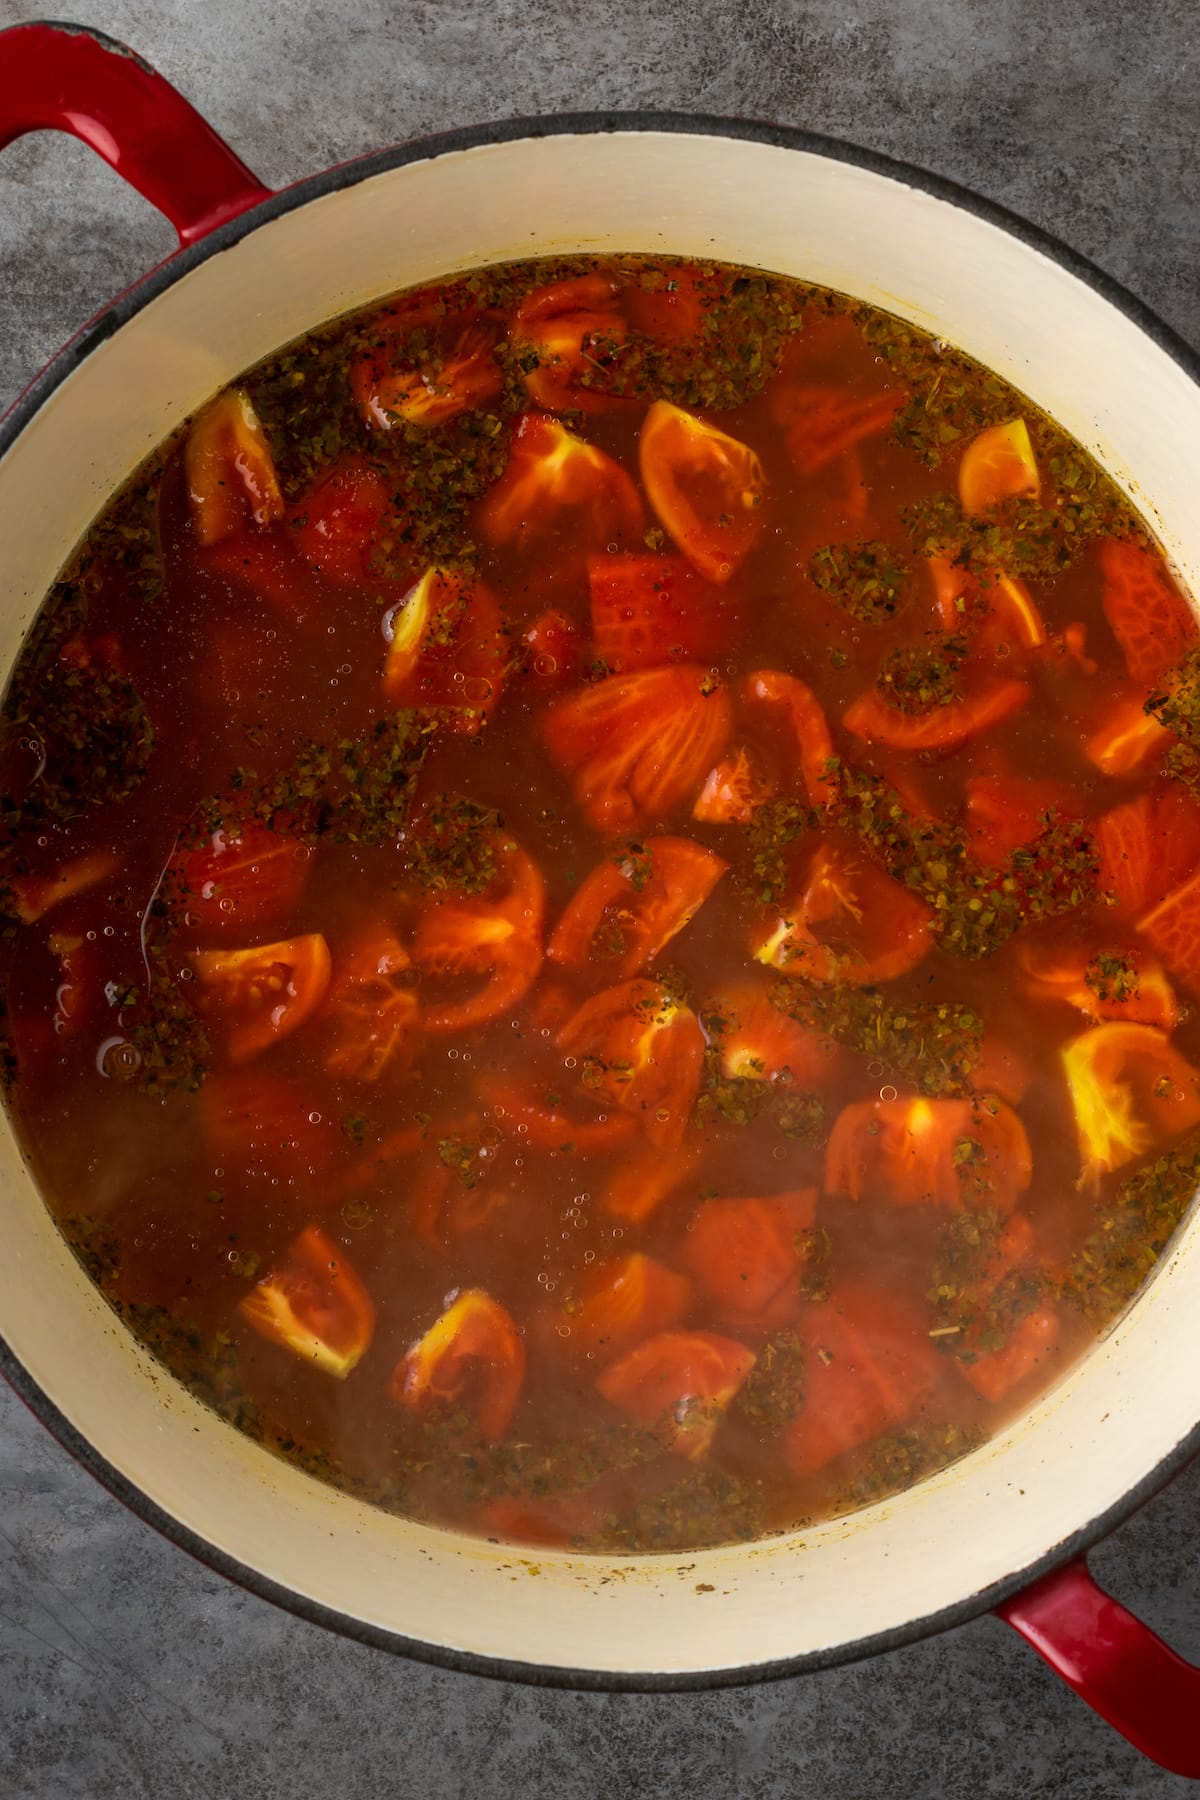 Tomatoes added to a large pot of simmering broth.